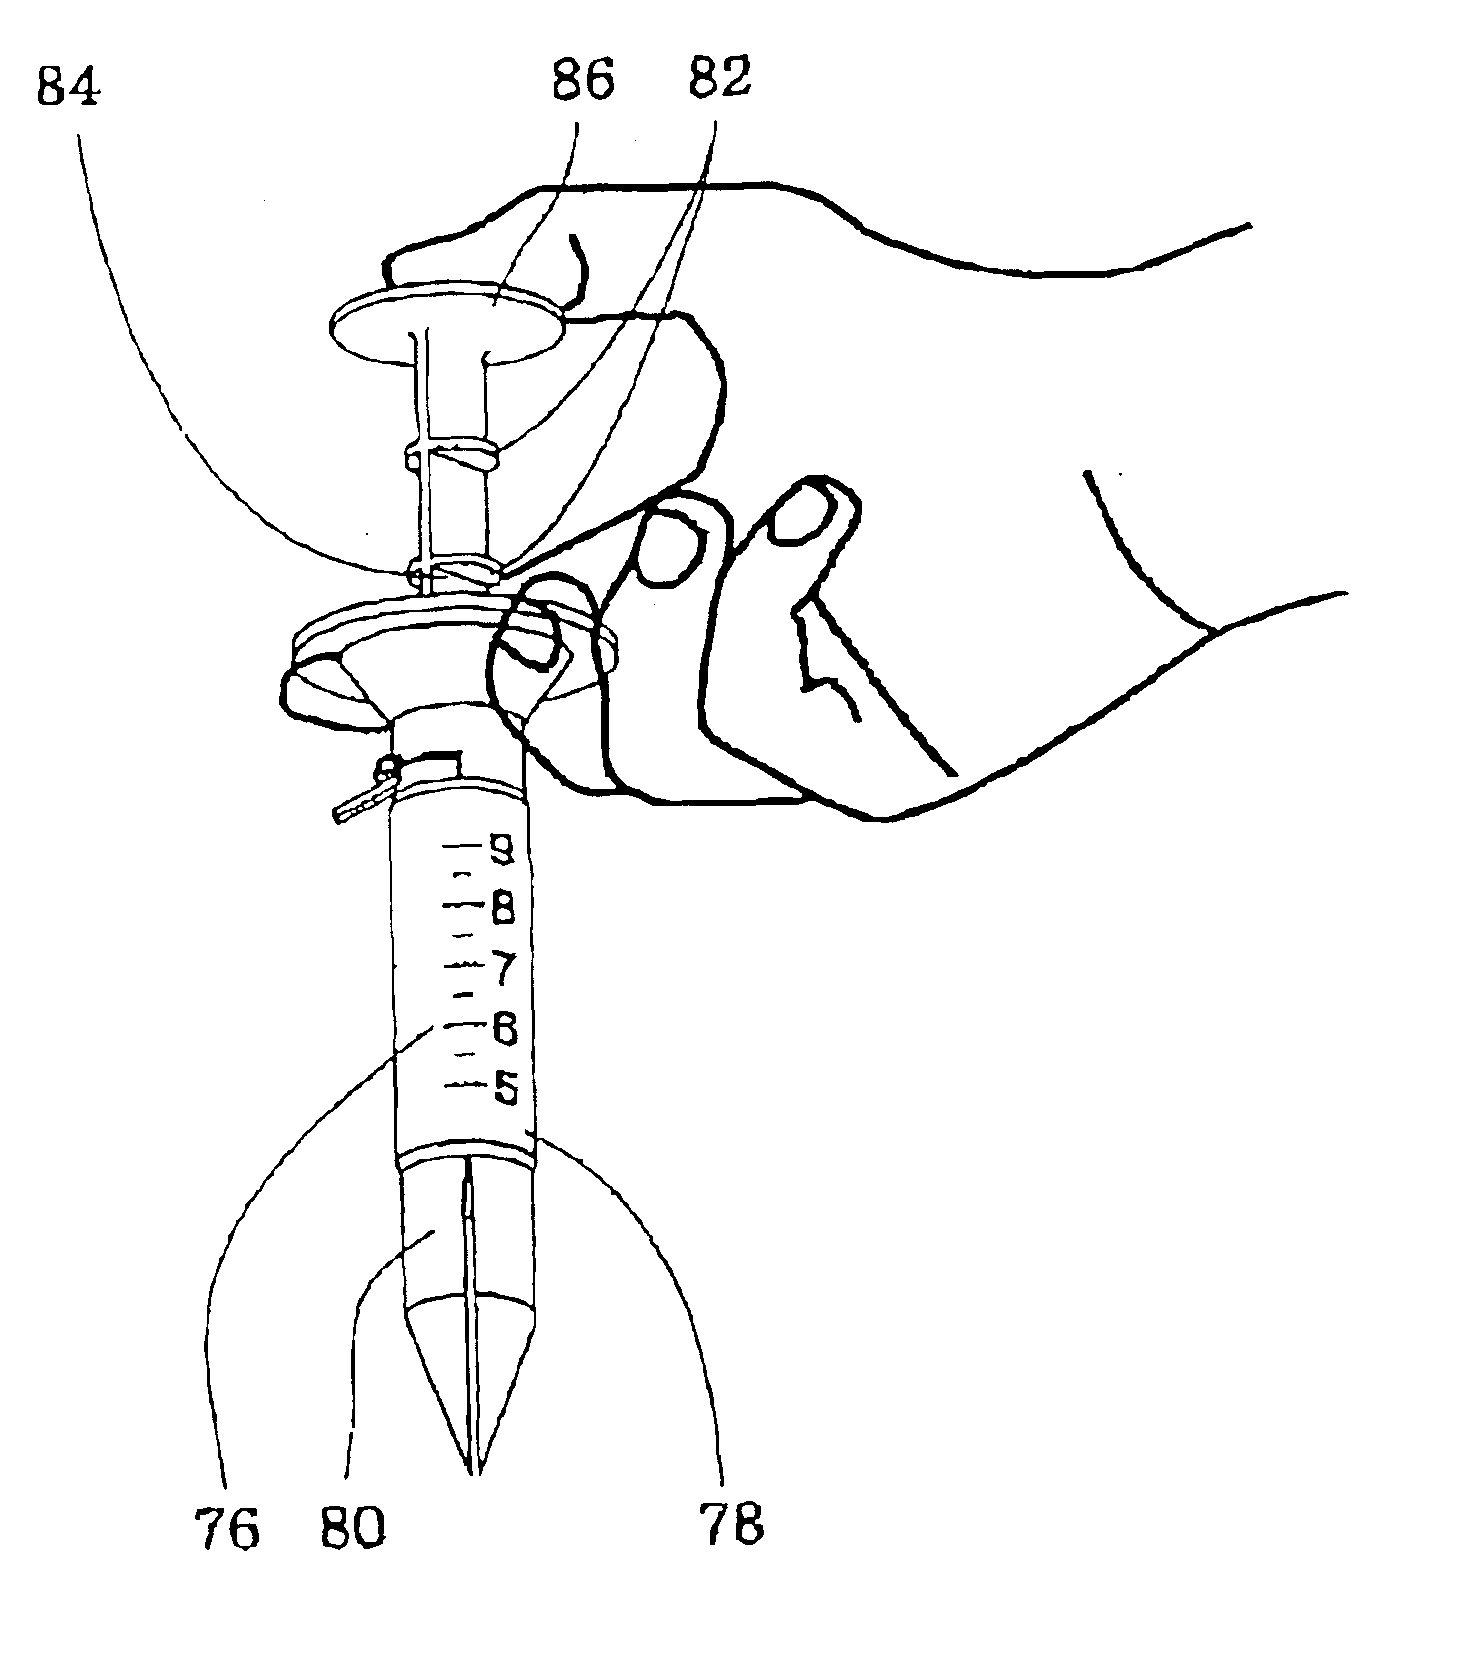 Food injection device